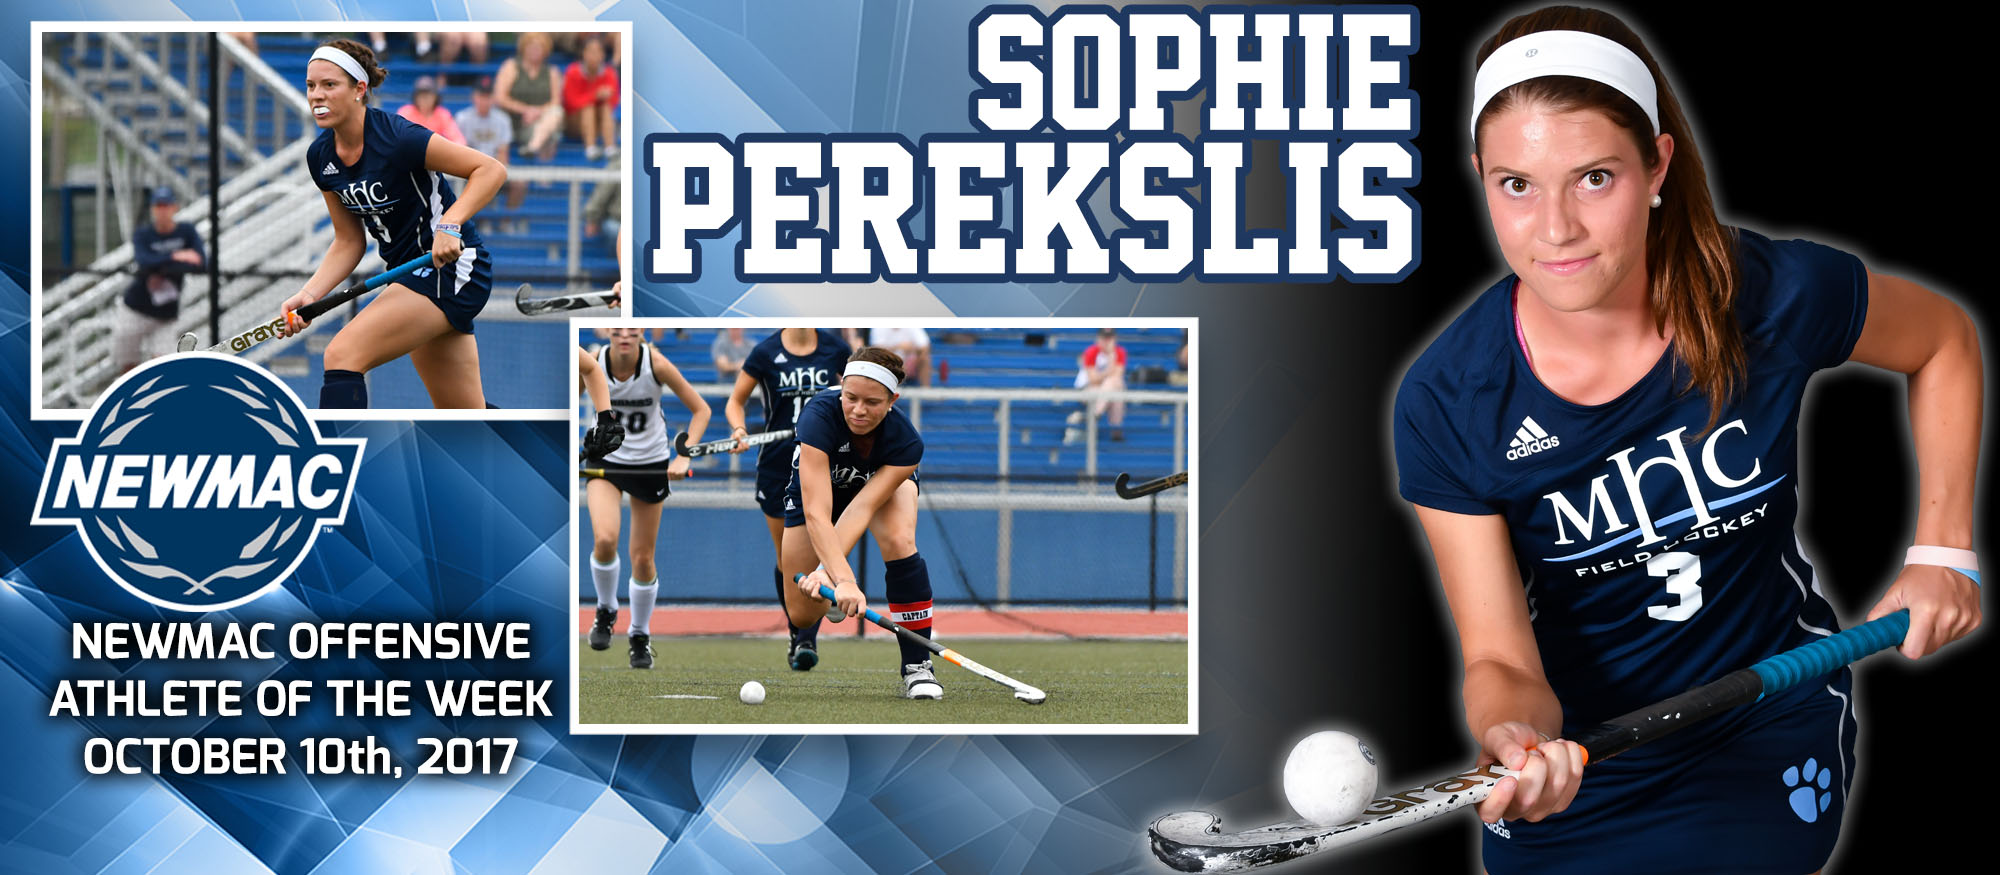 Collage image of field hockey player Sophie Perekslis who was named the NEWMAC Offensive Athlete of the Week for October 10, 2017.